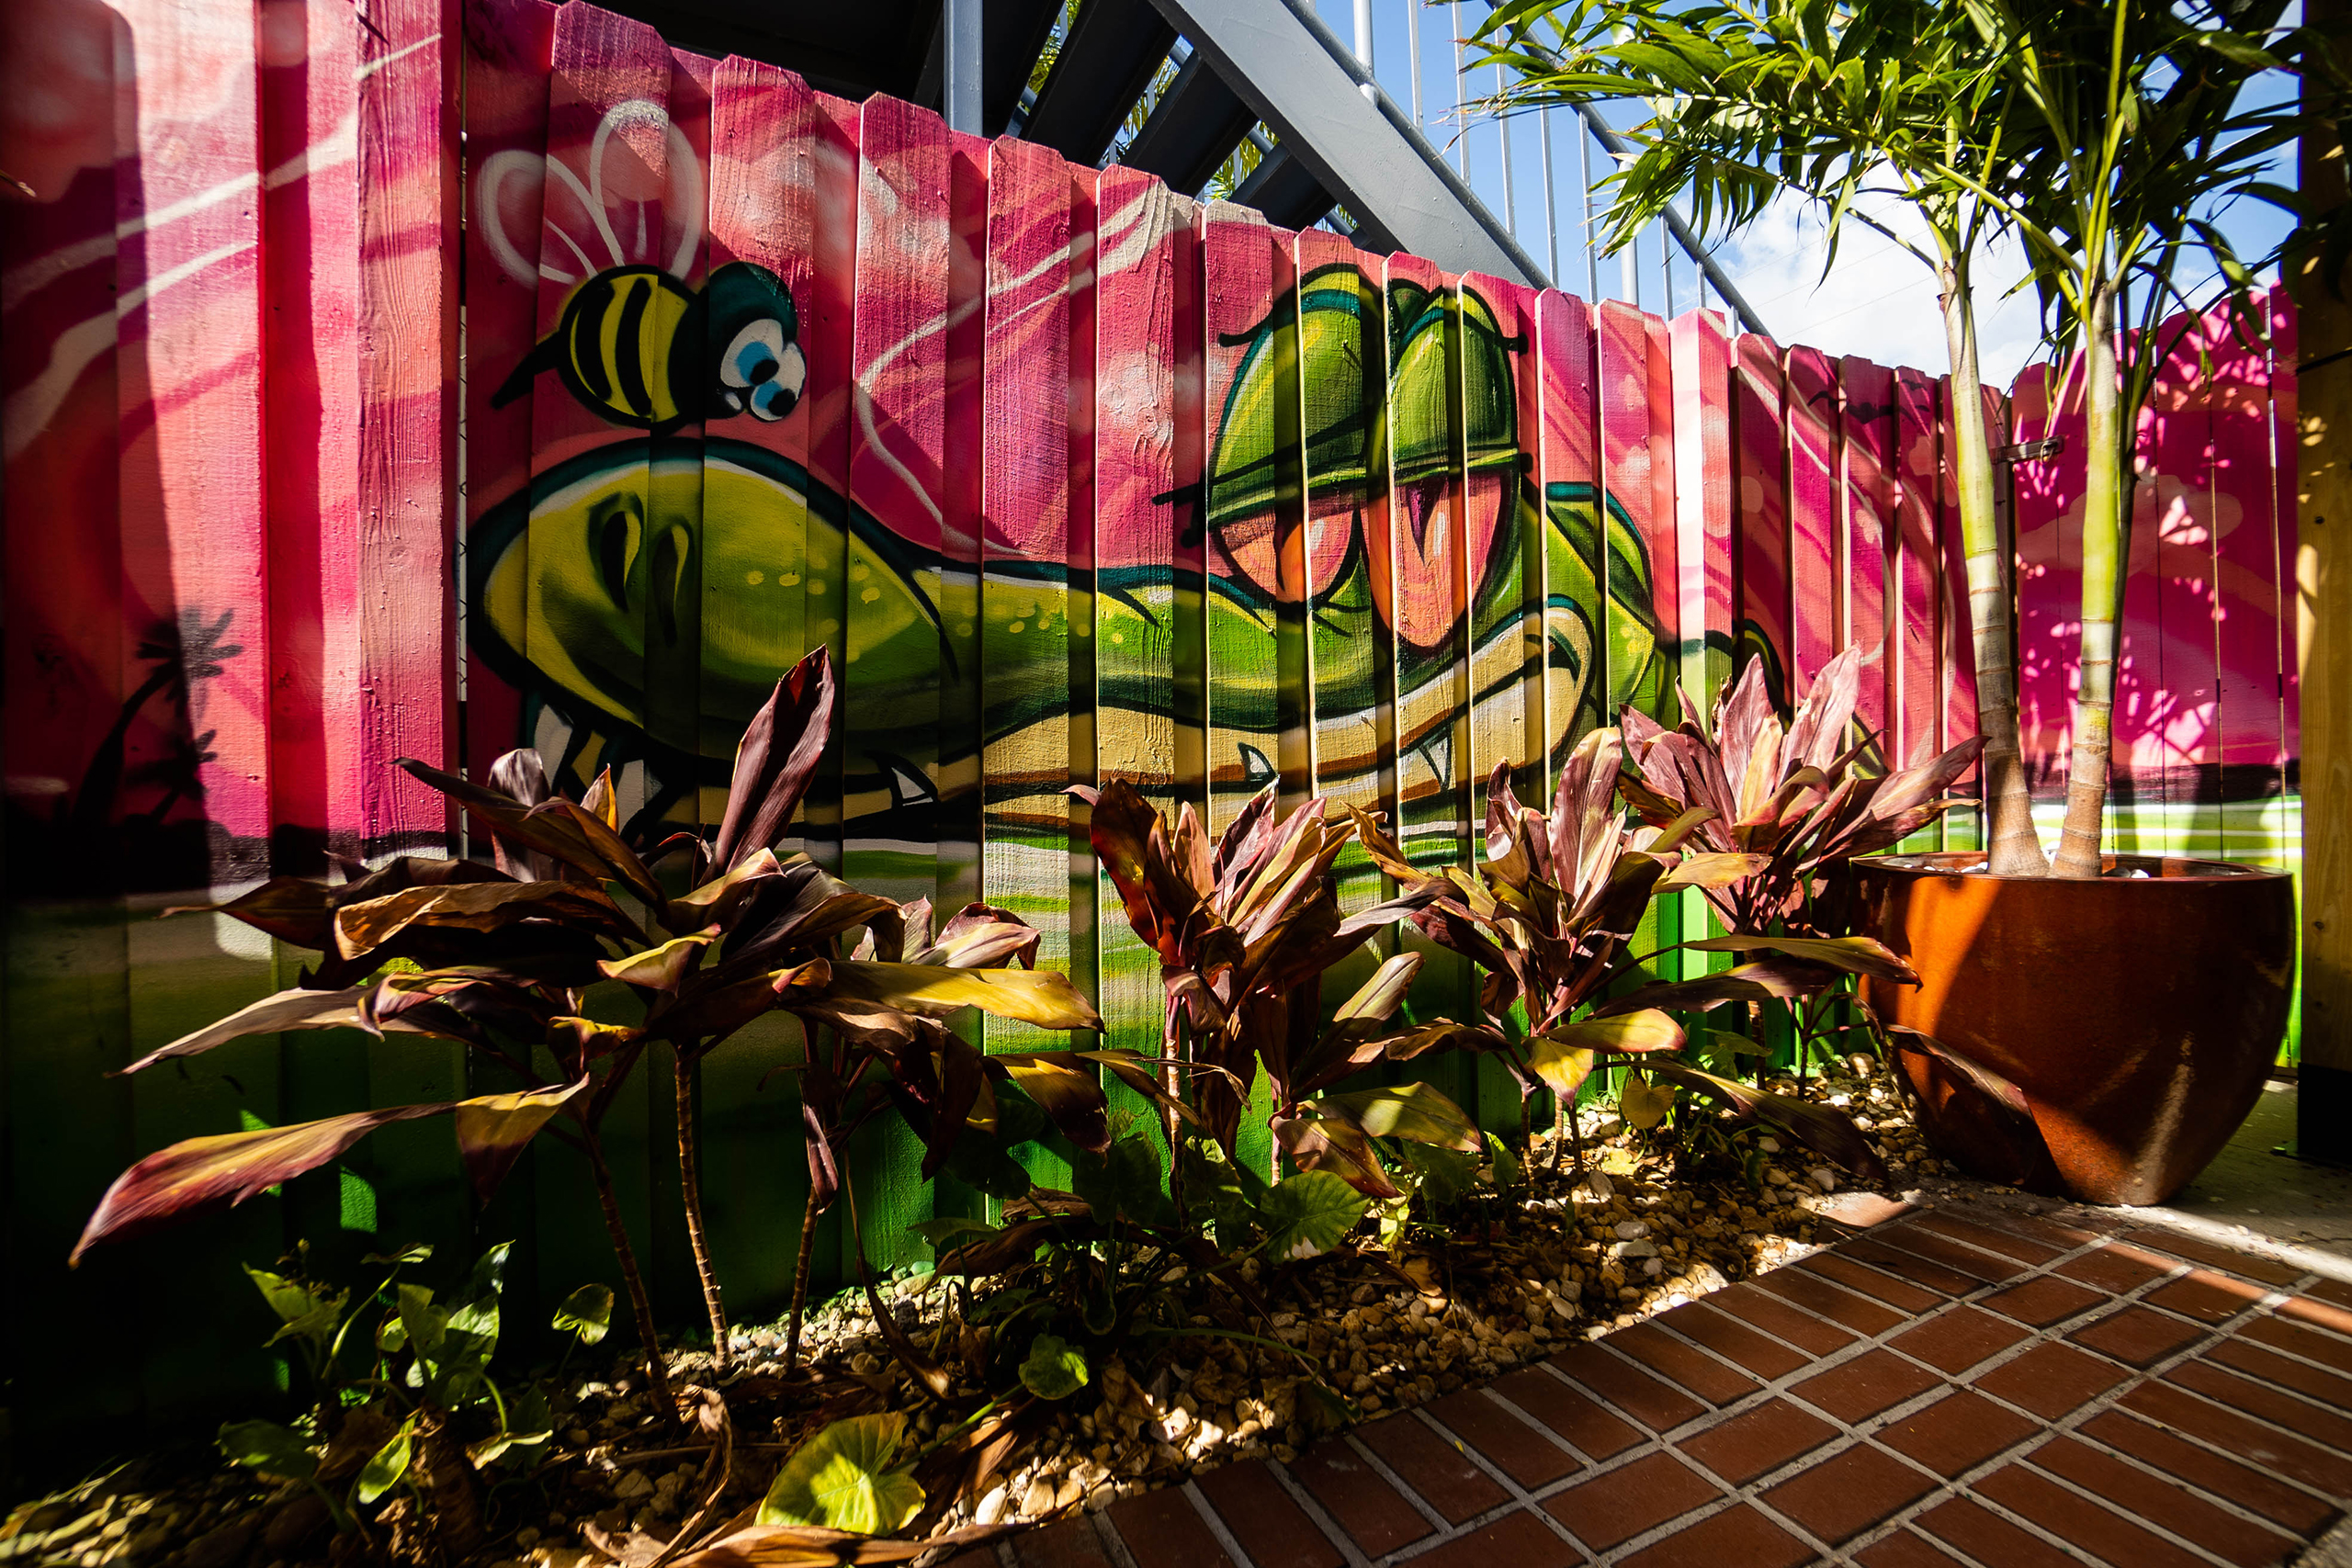 Bulk Styles mural at Cholo Soy Cocina in West Palm Beach, FL.